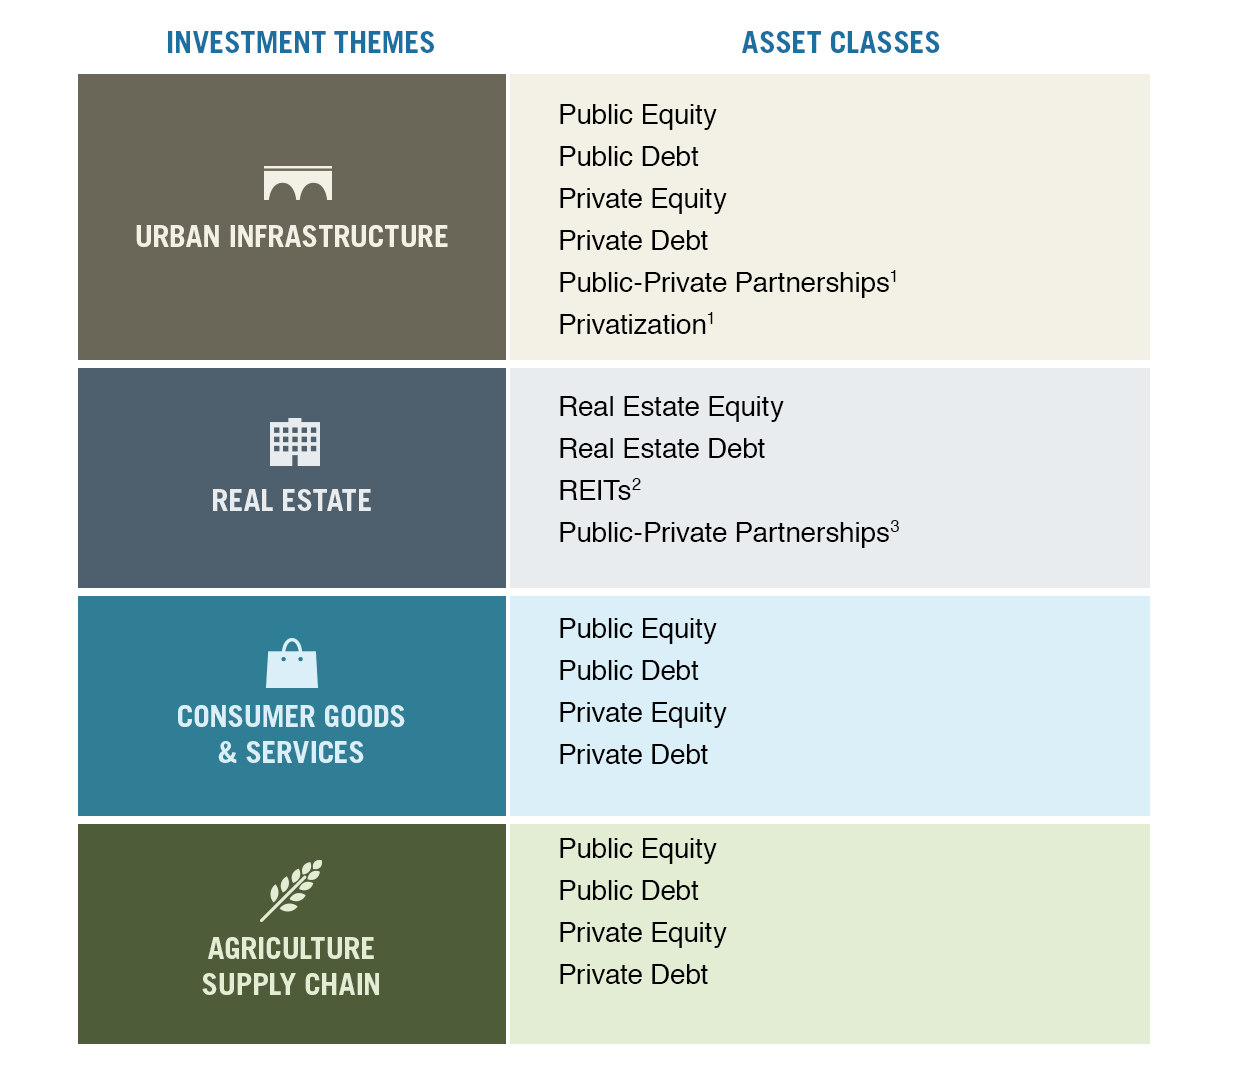 Investment Themes, Asset Classes